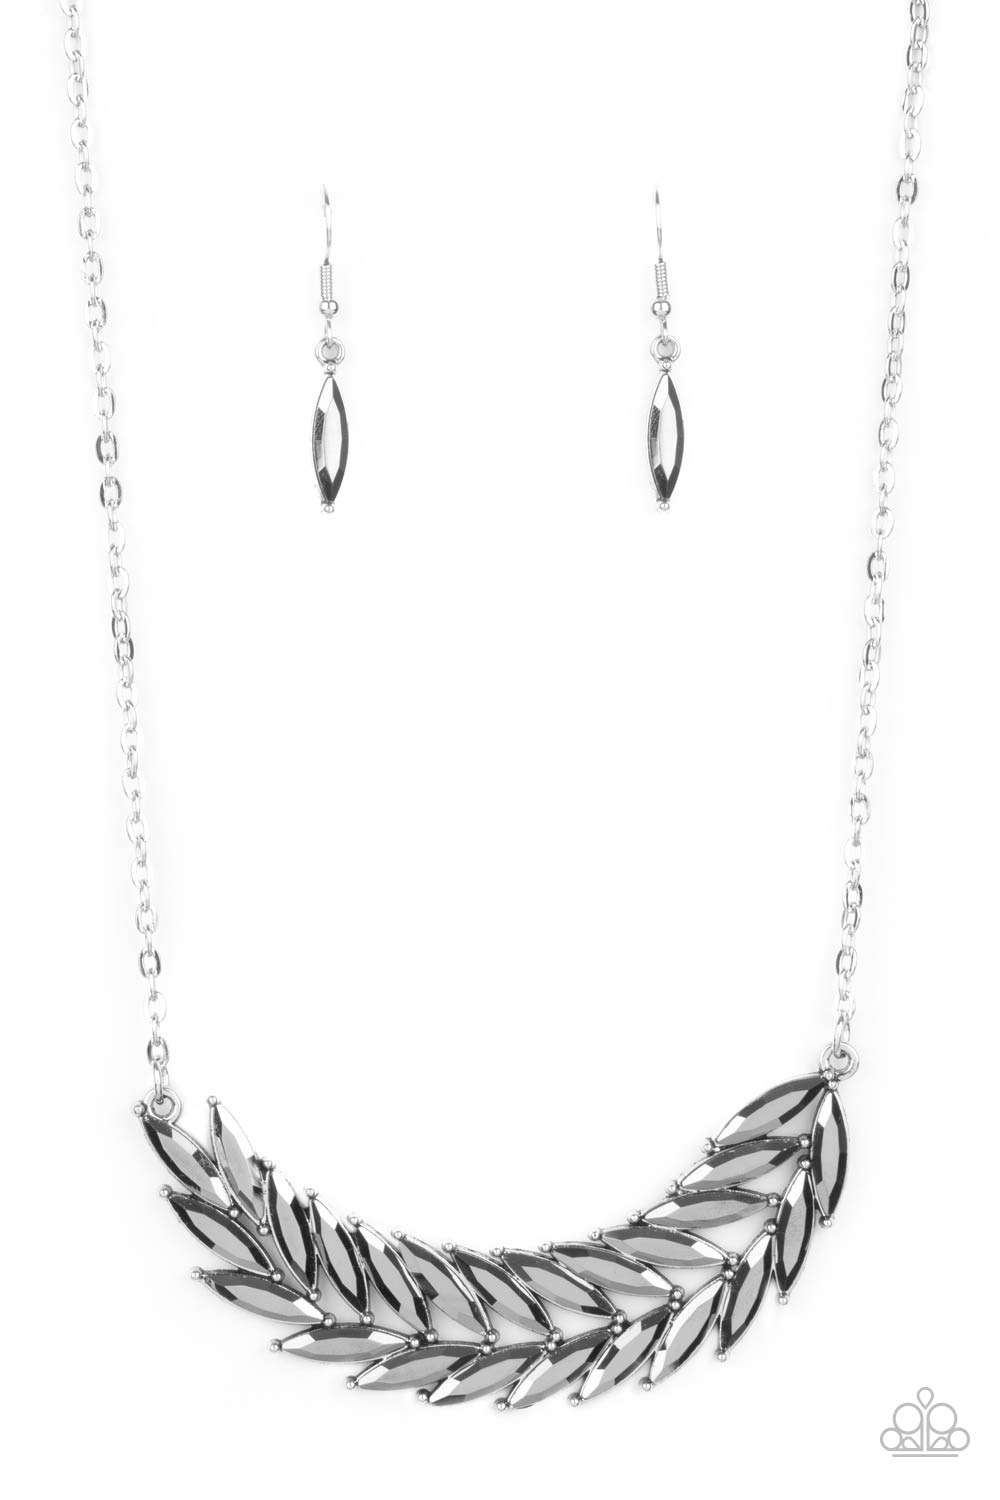 Flight of FANCINESS Silver Hematite Feather Necklace - Paparazzi Accessories- lightbox - CarasShop.com - $5 Jewelry by Cara Jewels